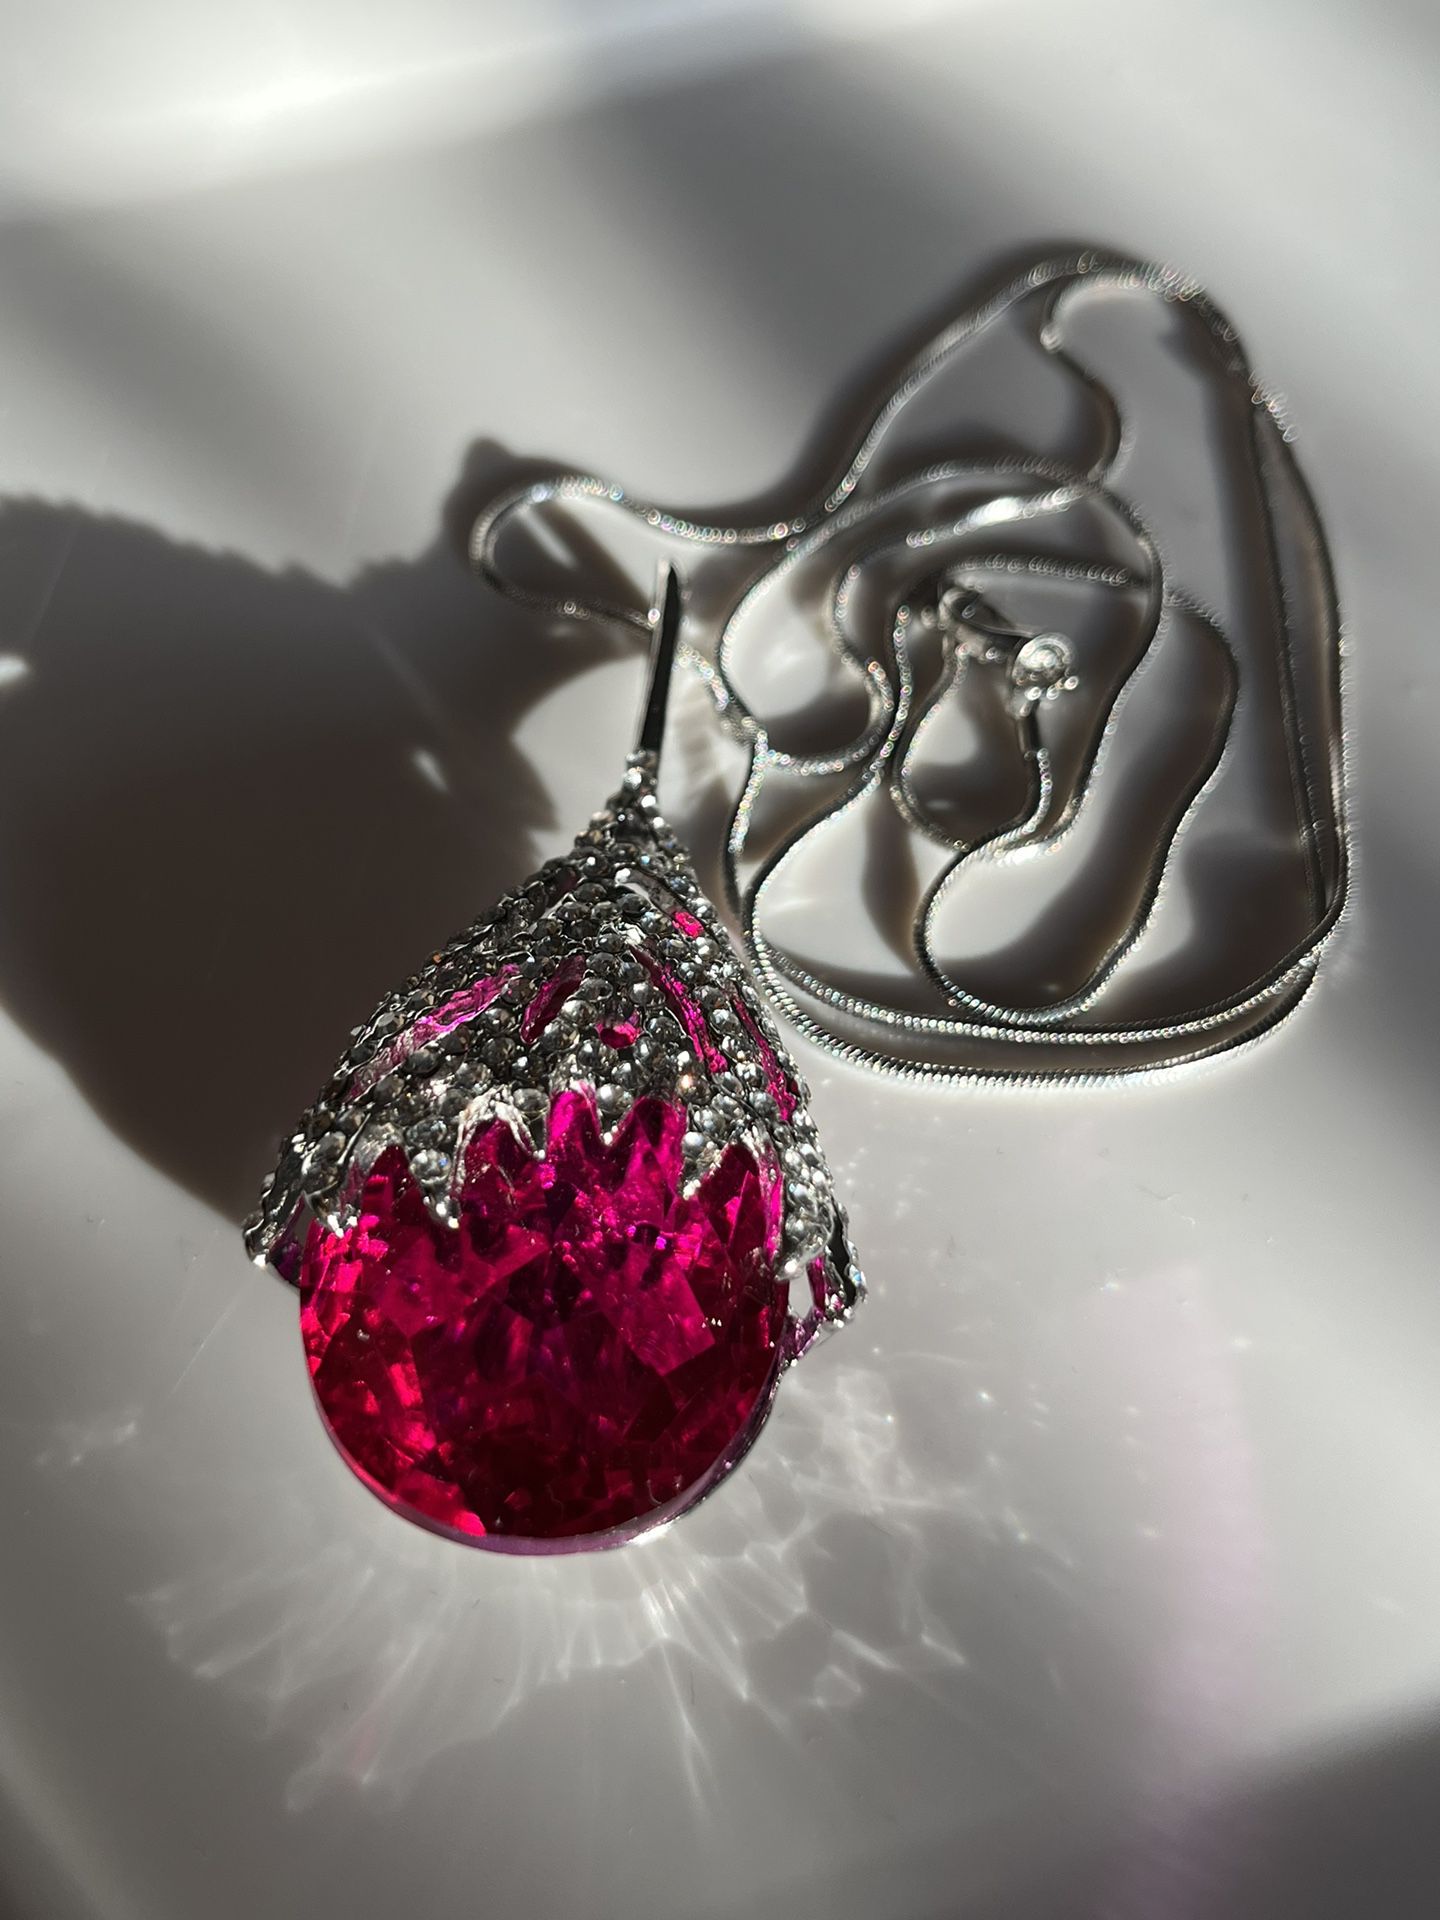 Pink Ruby And Silver Teardrop Pendant Necklace 